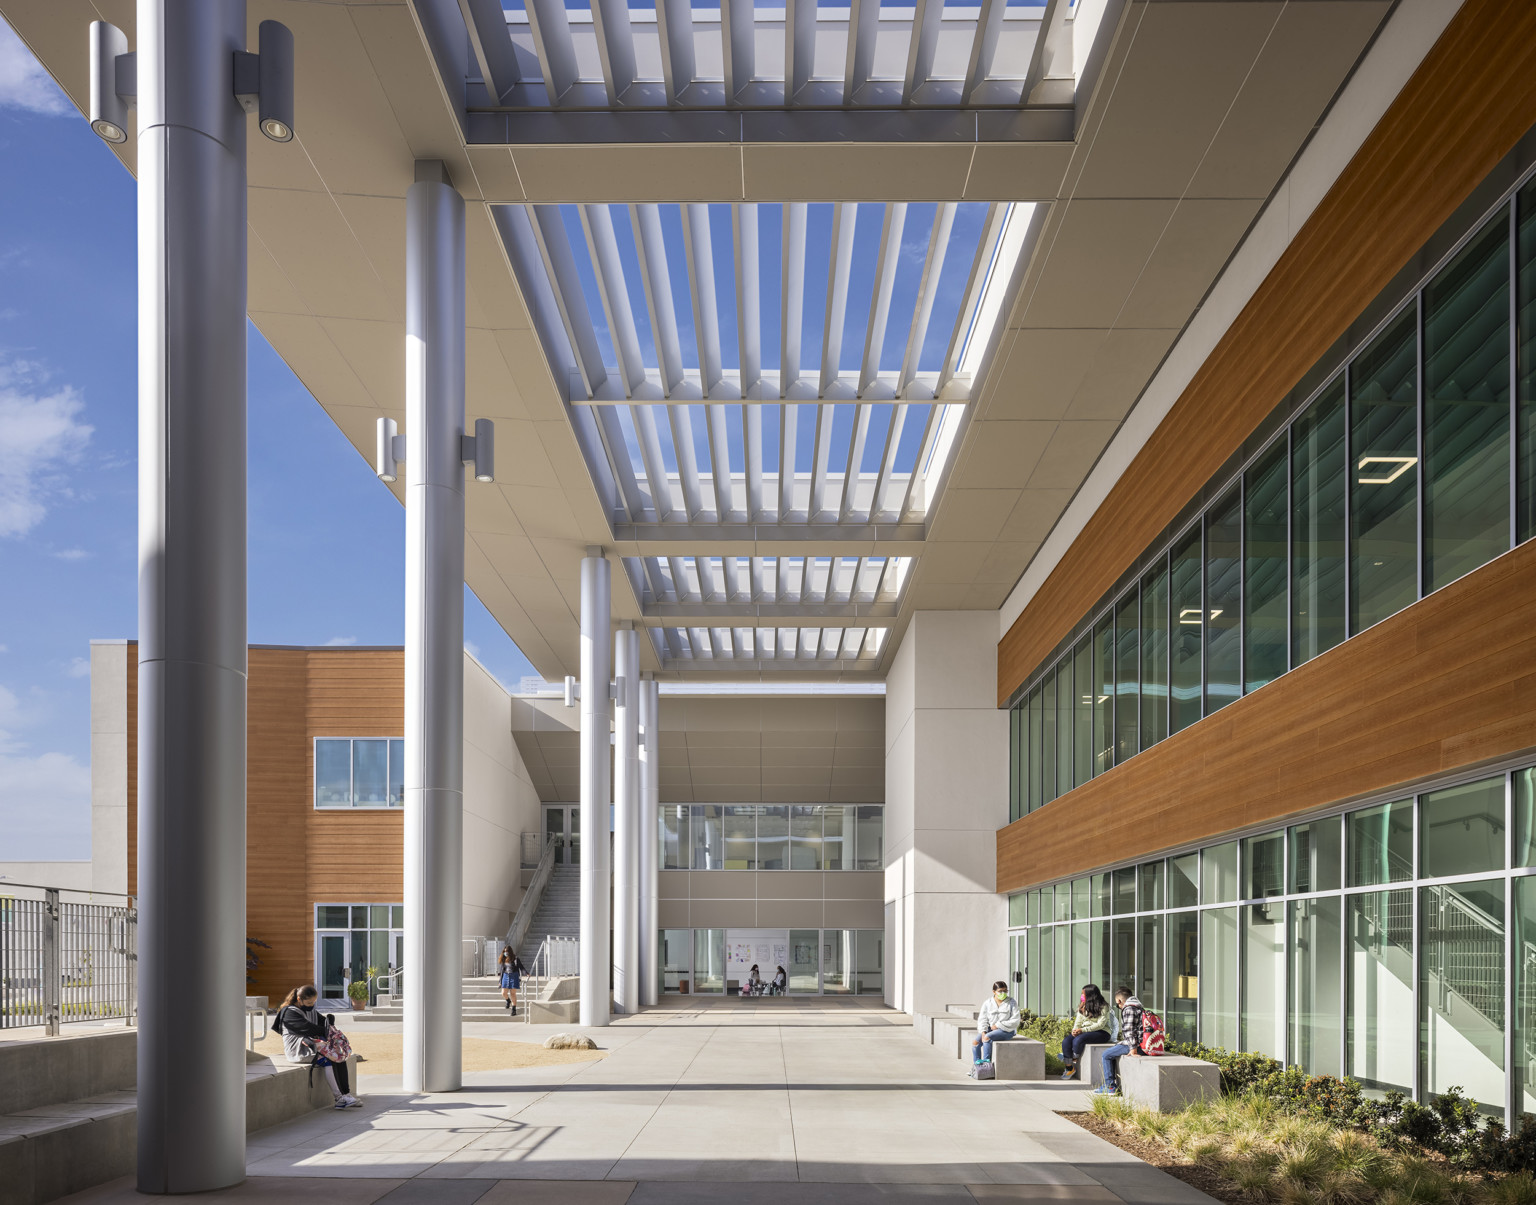 louvered canopy shades a building perimeter walkway